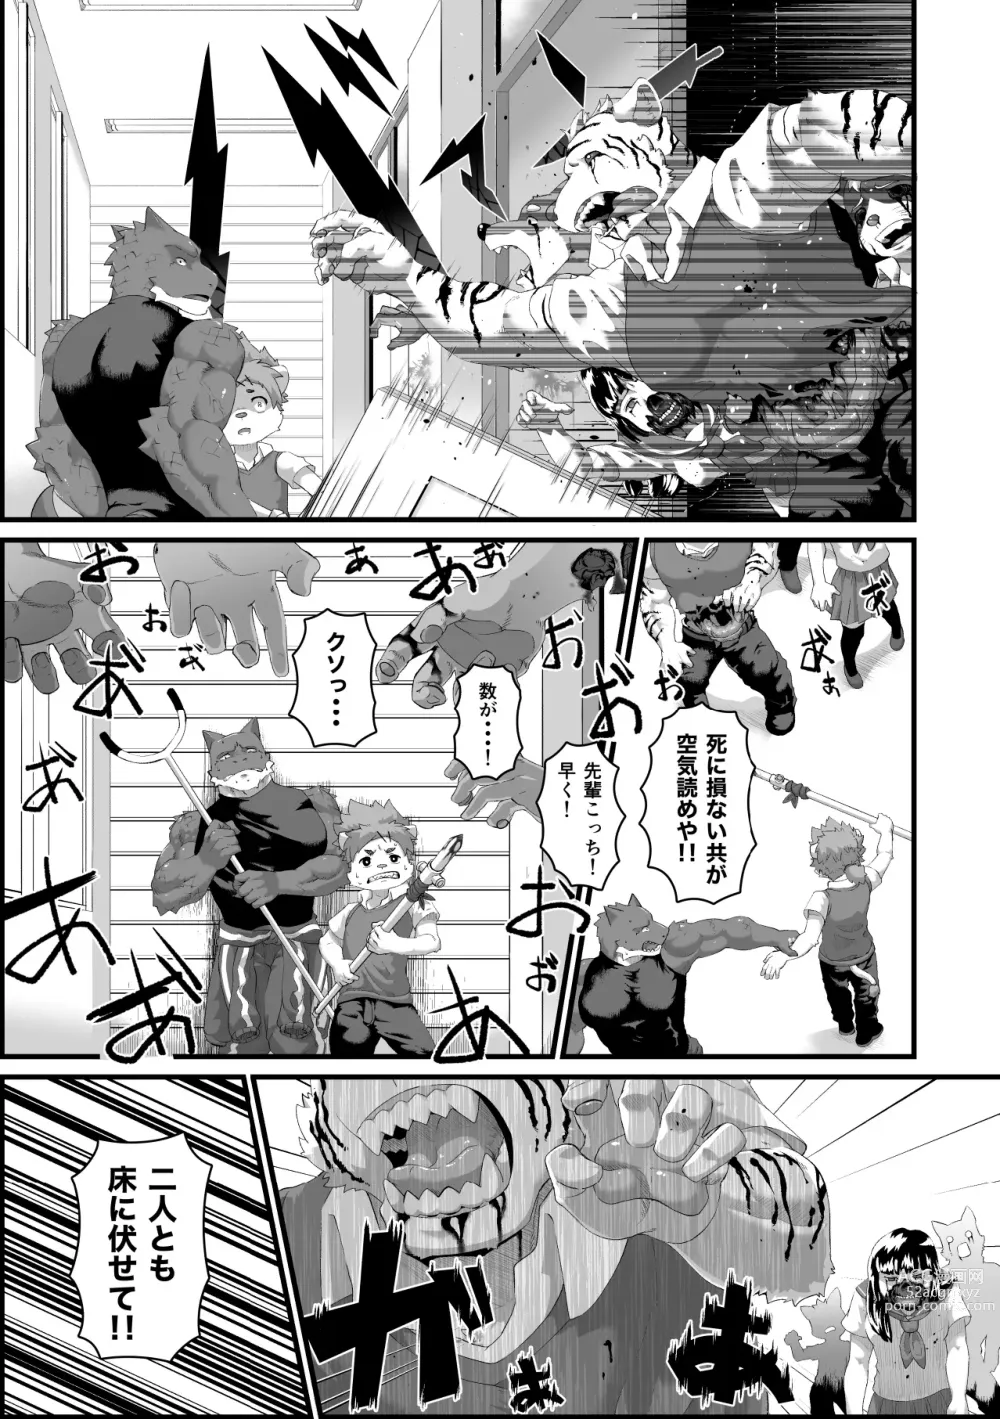 Page 7 of doujinshi Houkago Outbreak